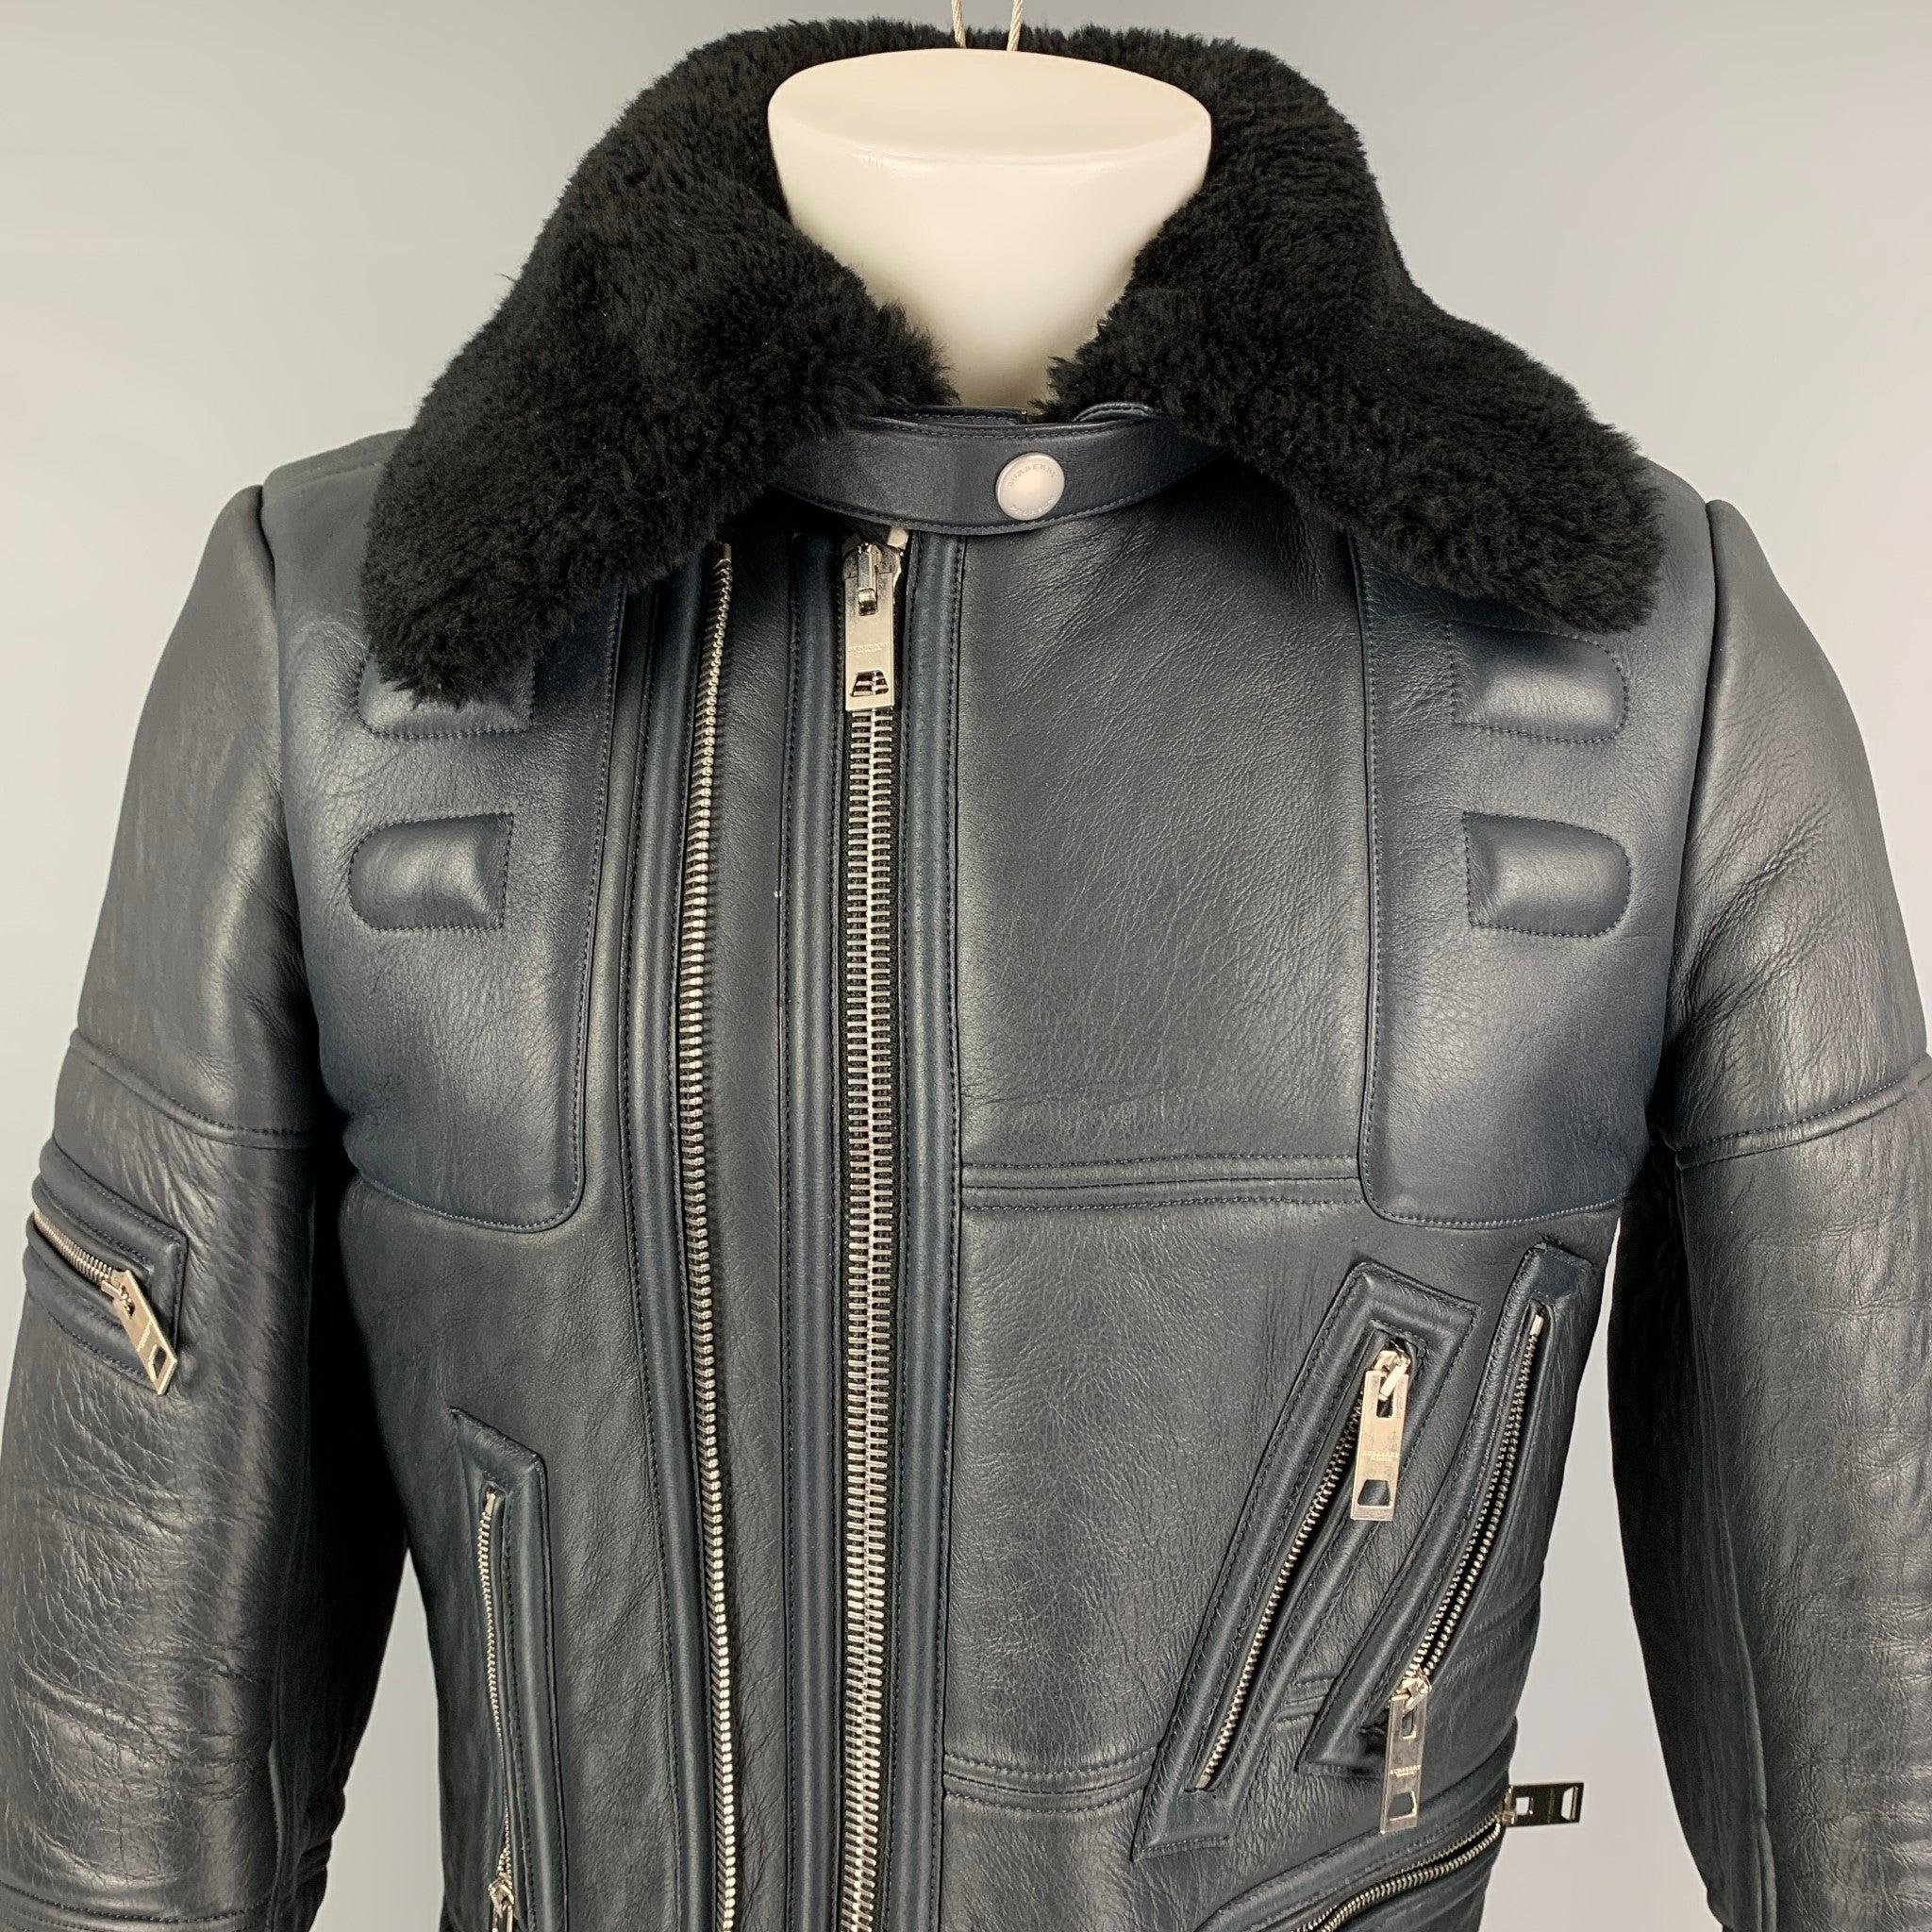 BURBERRY PRORSUM FW 2010 jacket comes in a ink dark blue lamb leather featuring a biker style, black lamb shearling collar, padded details, silver tone hardware, belted detail, zipper pockets, zipped cuffs, and a double zip up closure. Made in